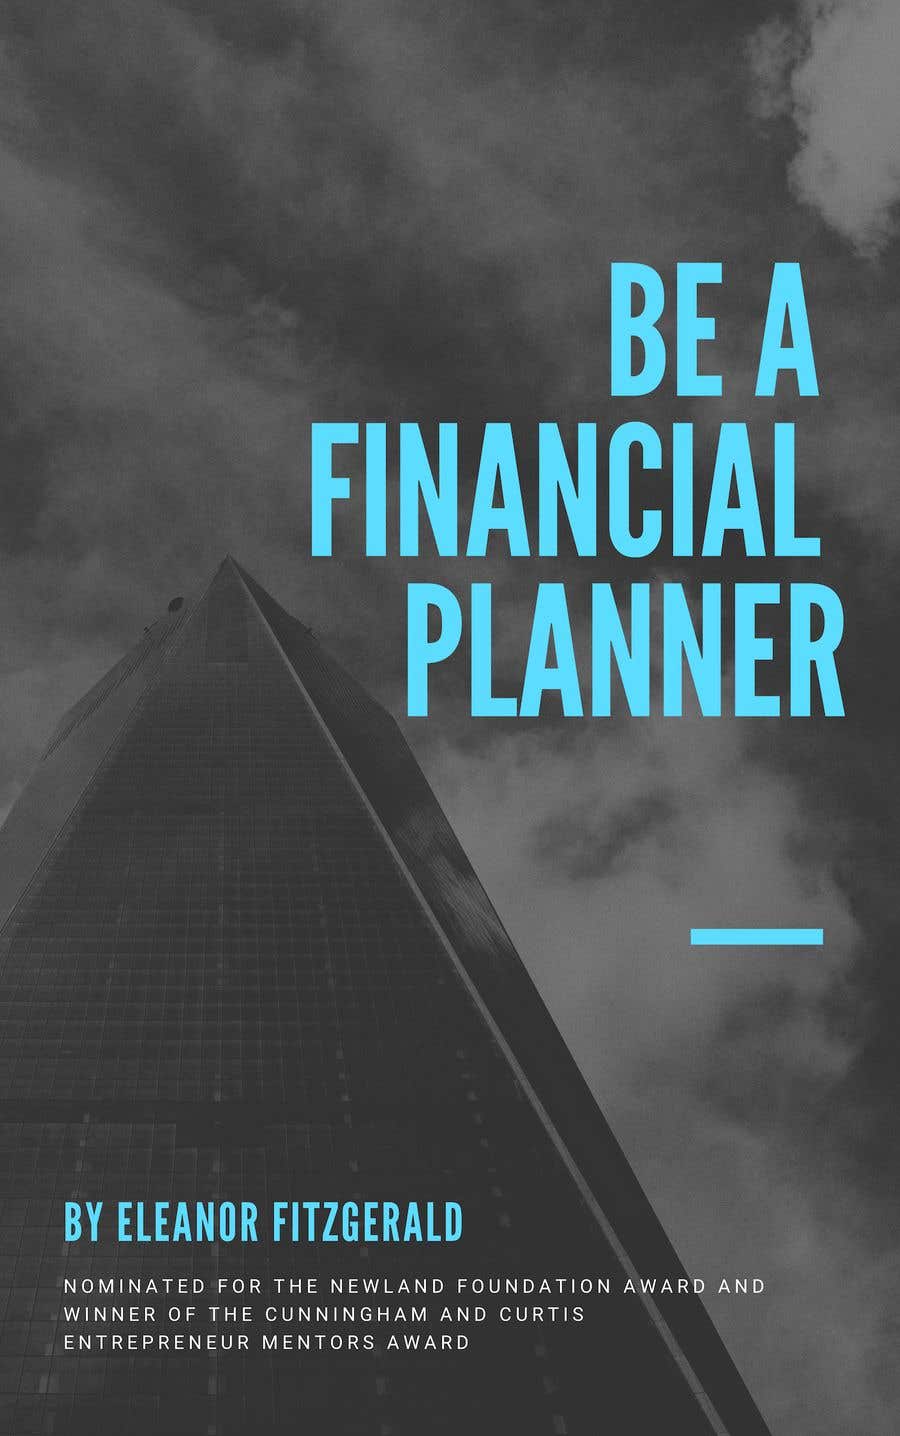 Kandidatura #97për                                                 Book Cover. "Top 5 Reasons You Should Be A Financial Planner"
                                            